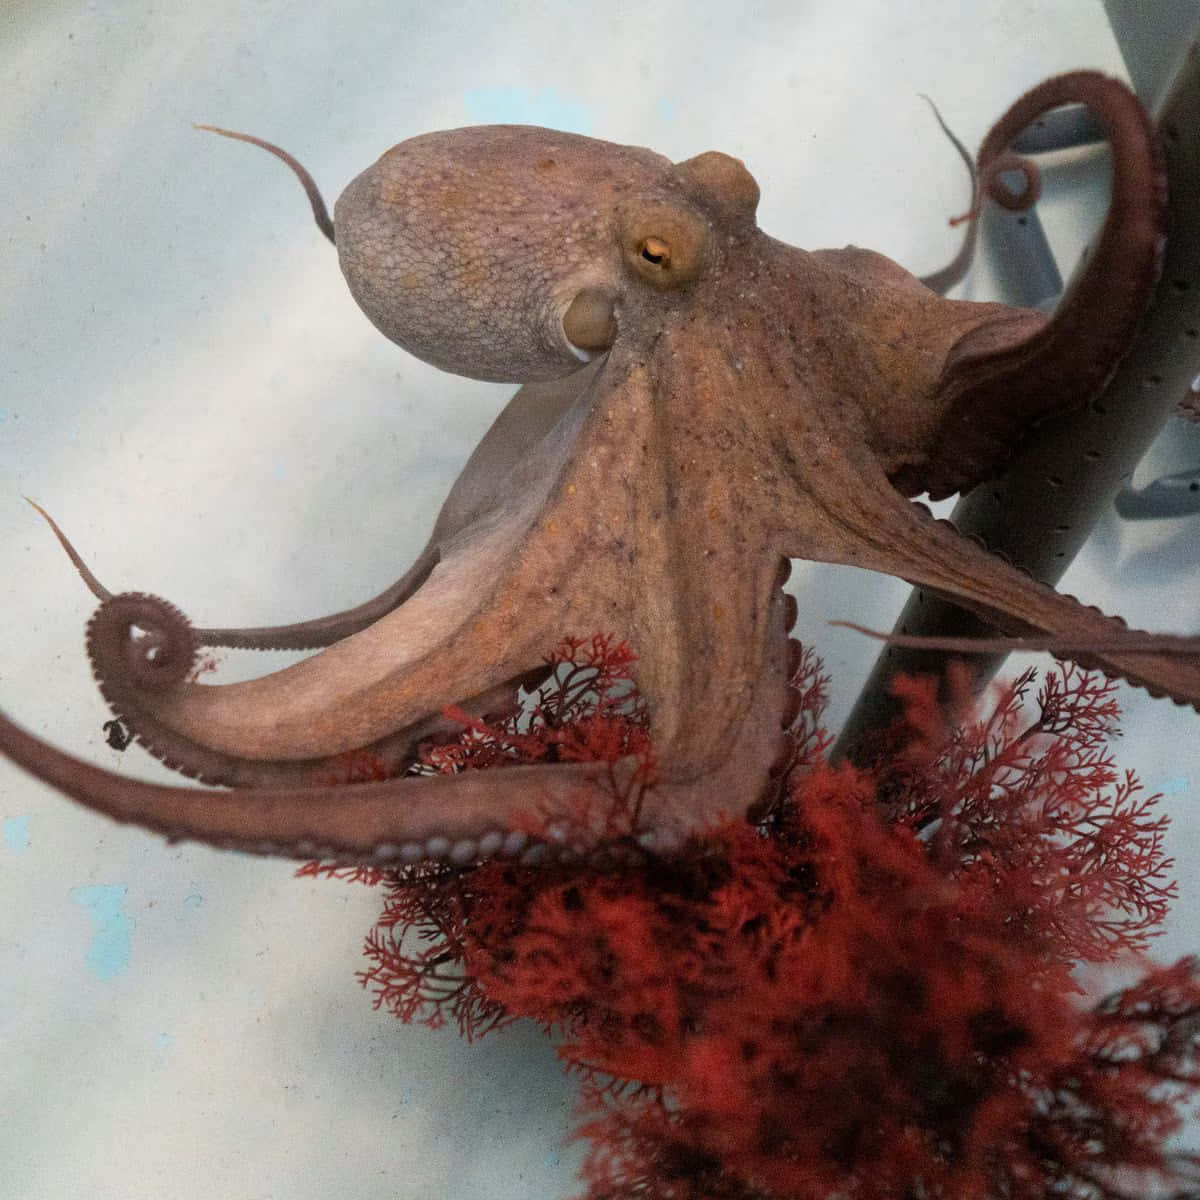 The Octopus - A Mysterious and Remarkable Creature